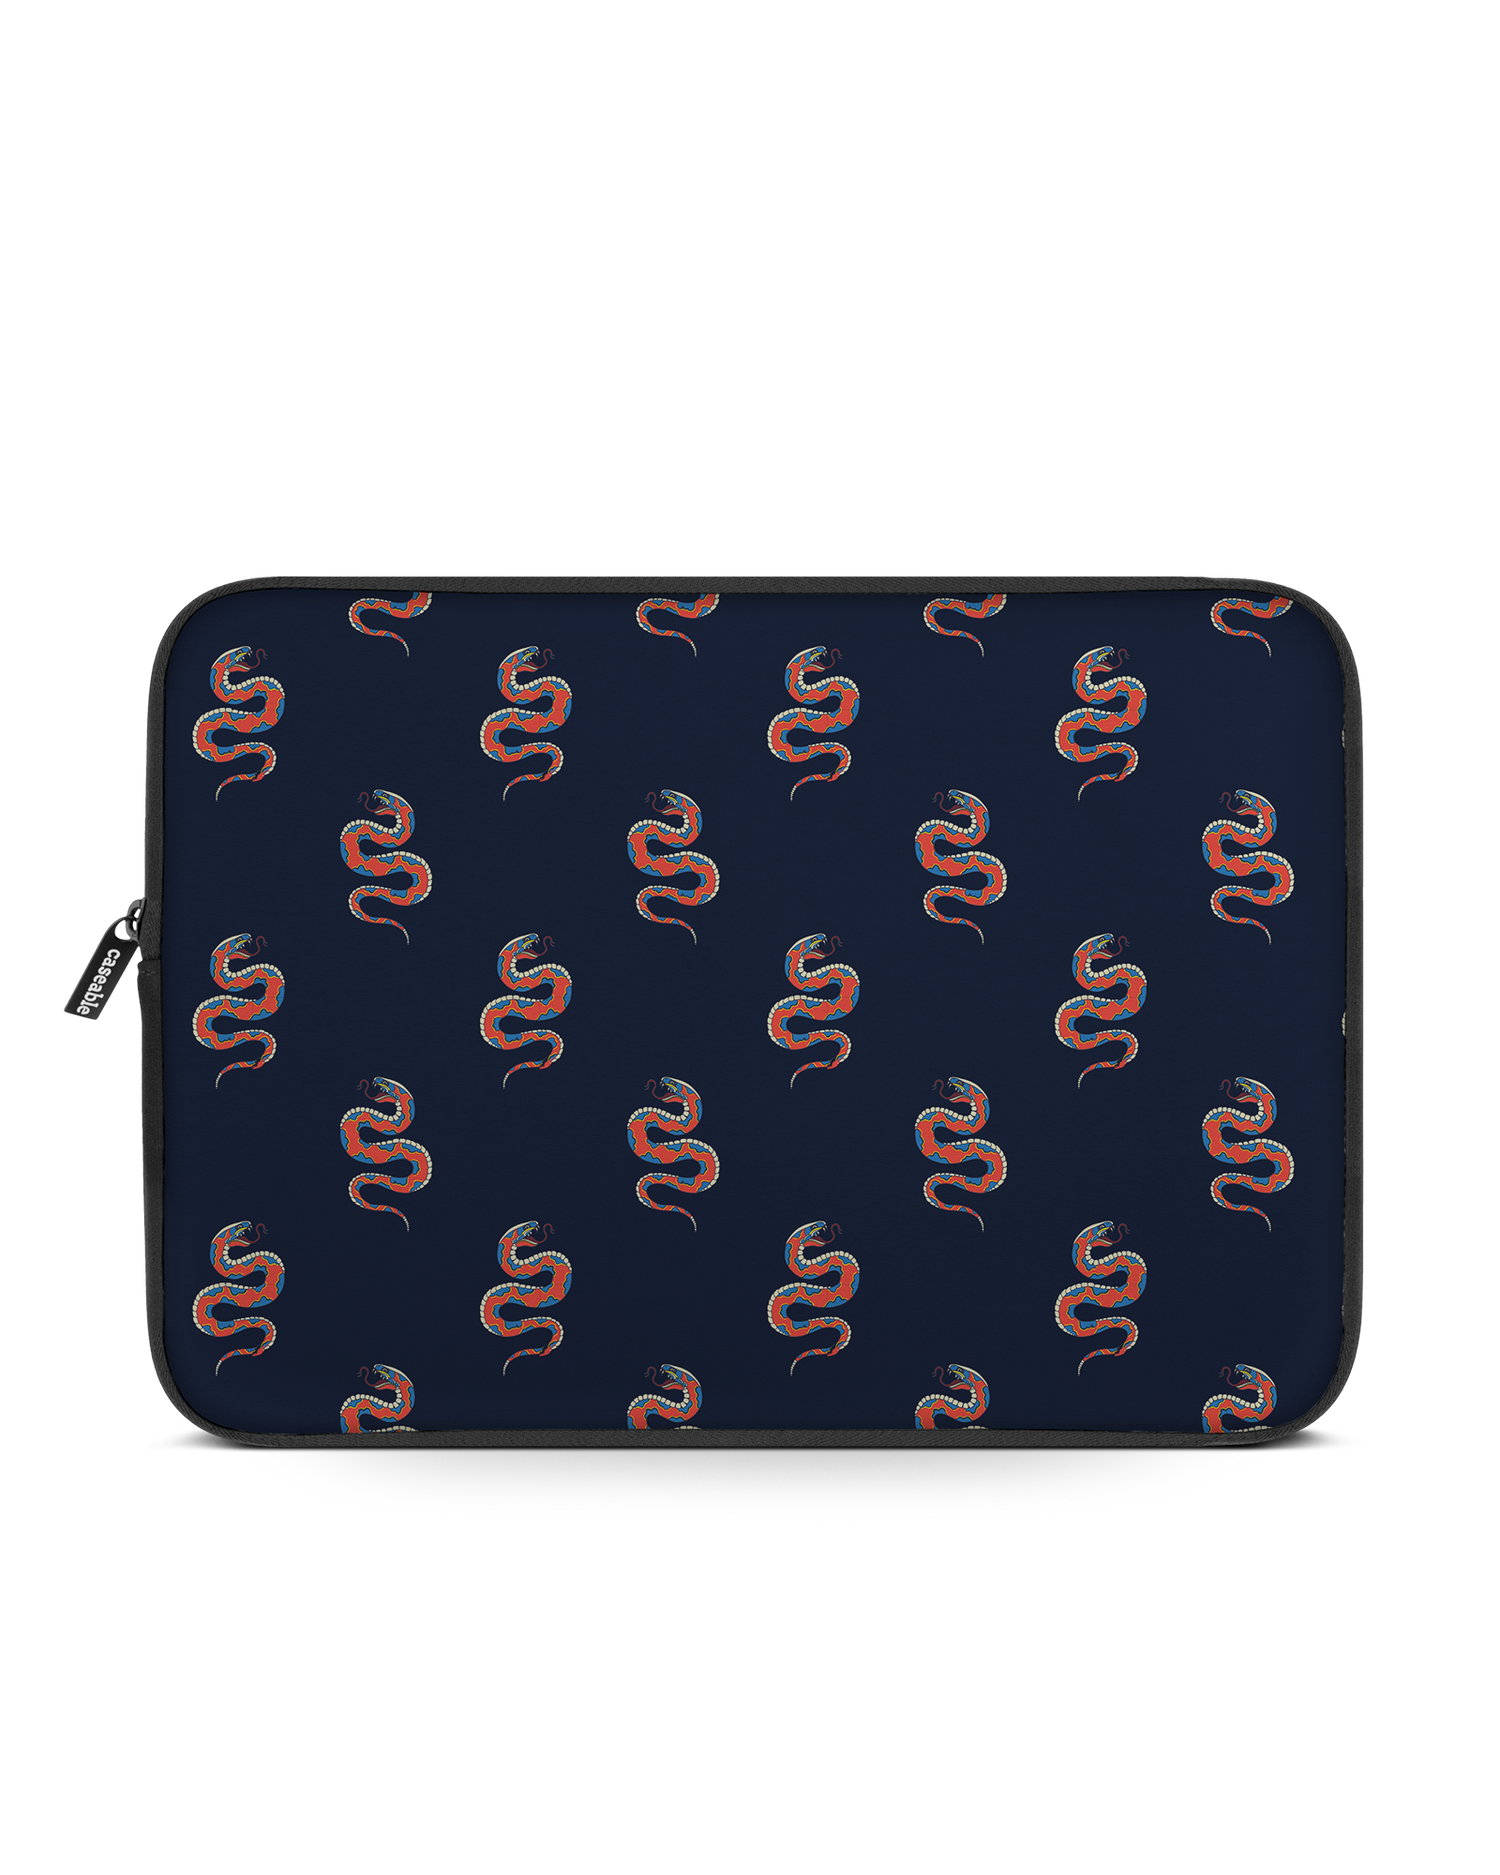 Repeating Snakes Laptop Case 16 inch: Front View